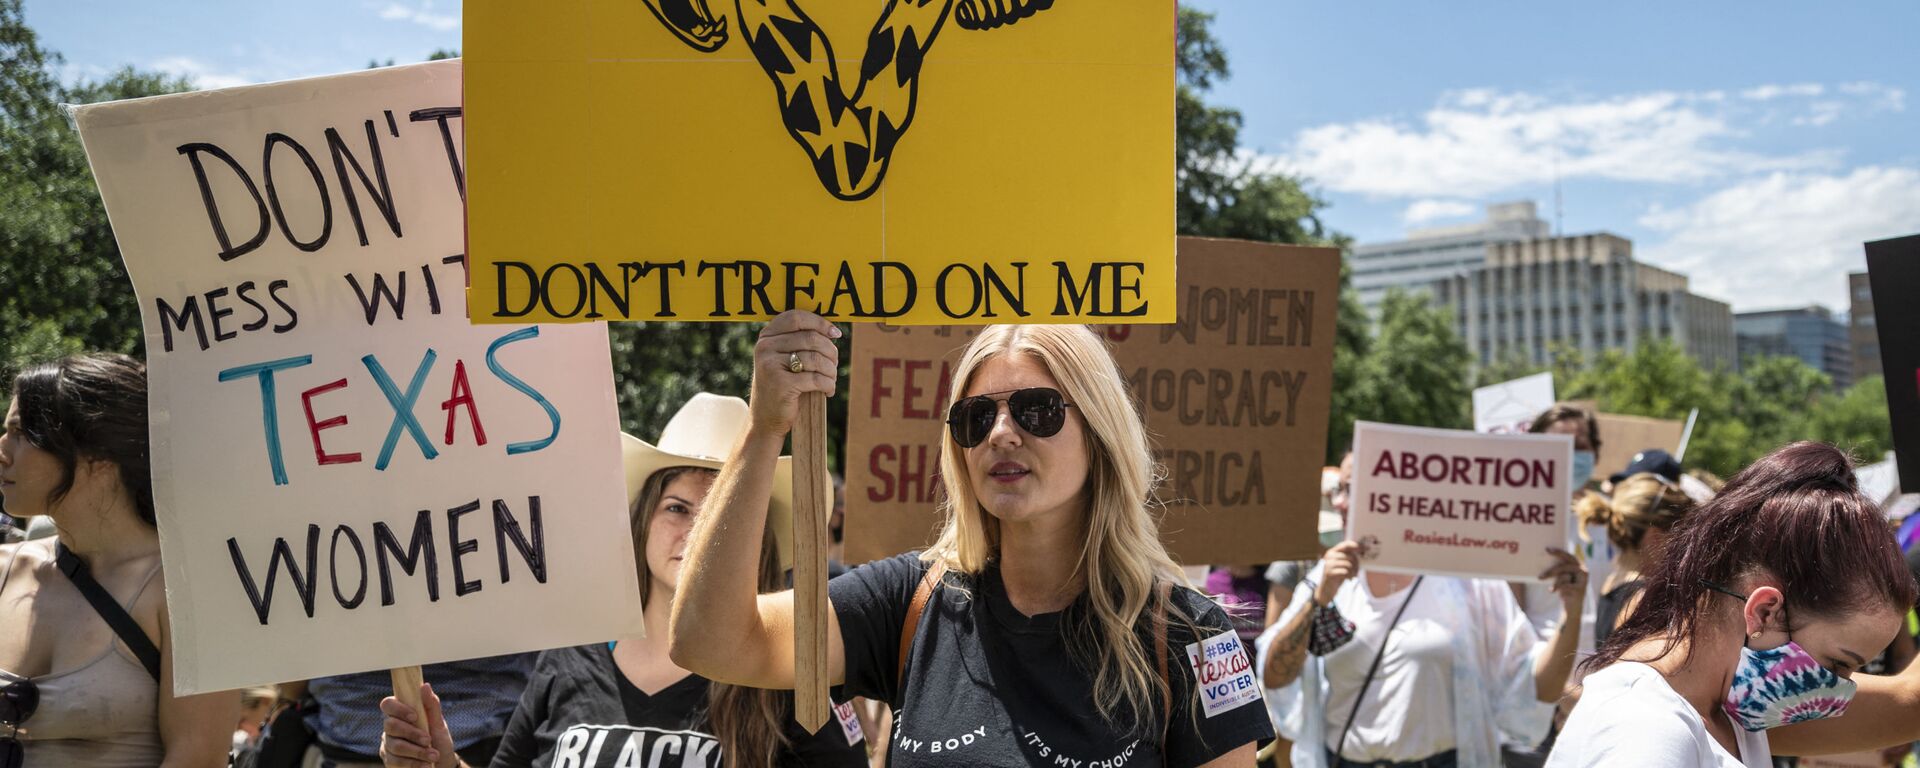 Protesters hold up signs at a protest outside the Texas state capitol on May 29, 2021 in Austin, Texas. - Sputnik International, 1920, 15.07.2022